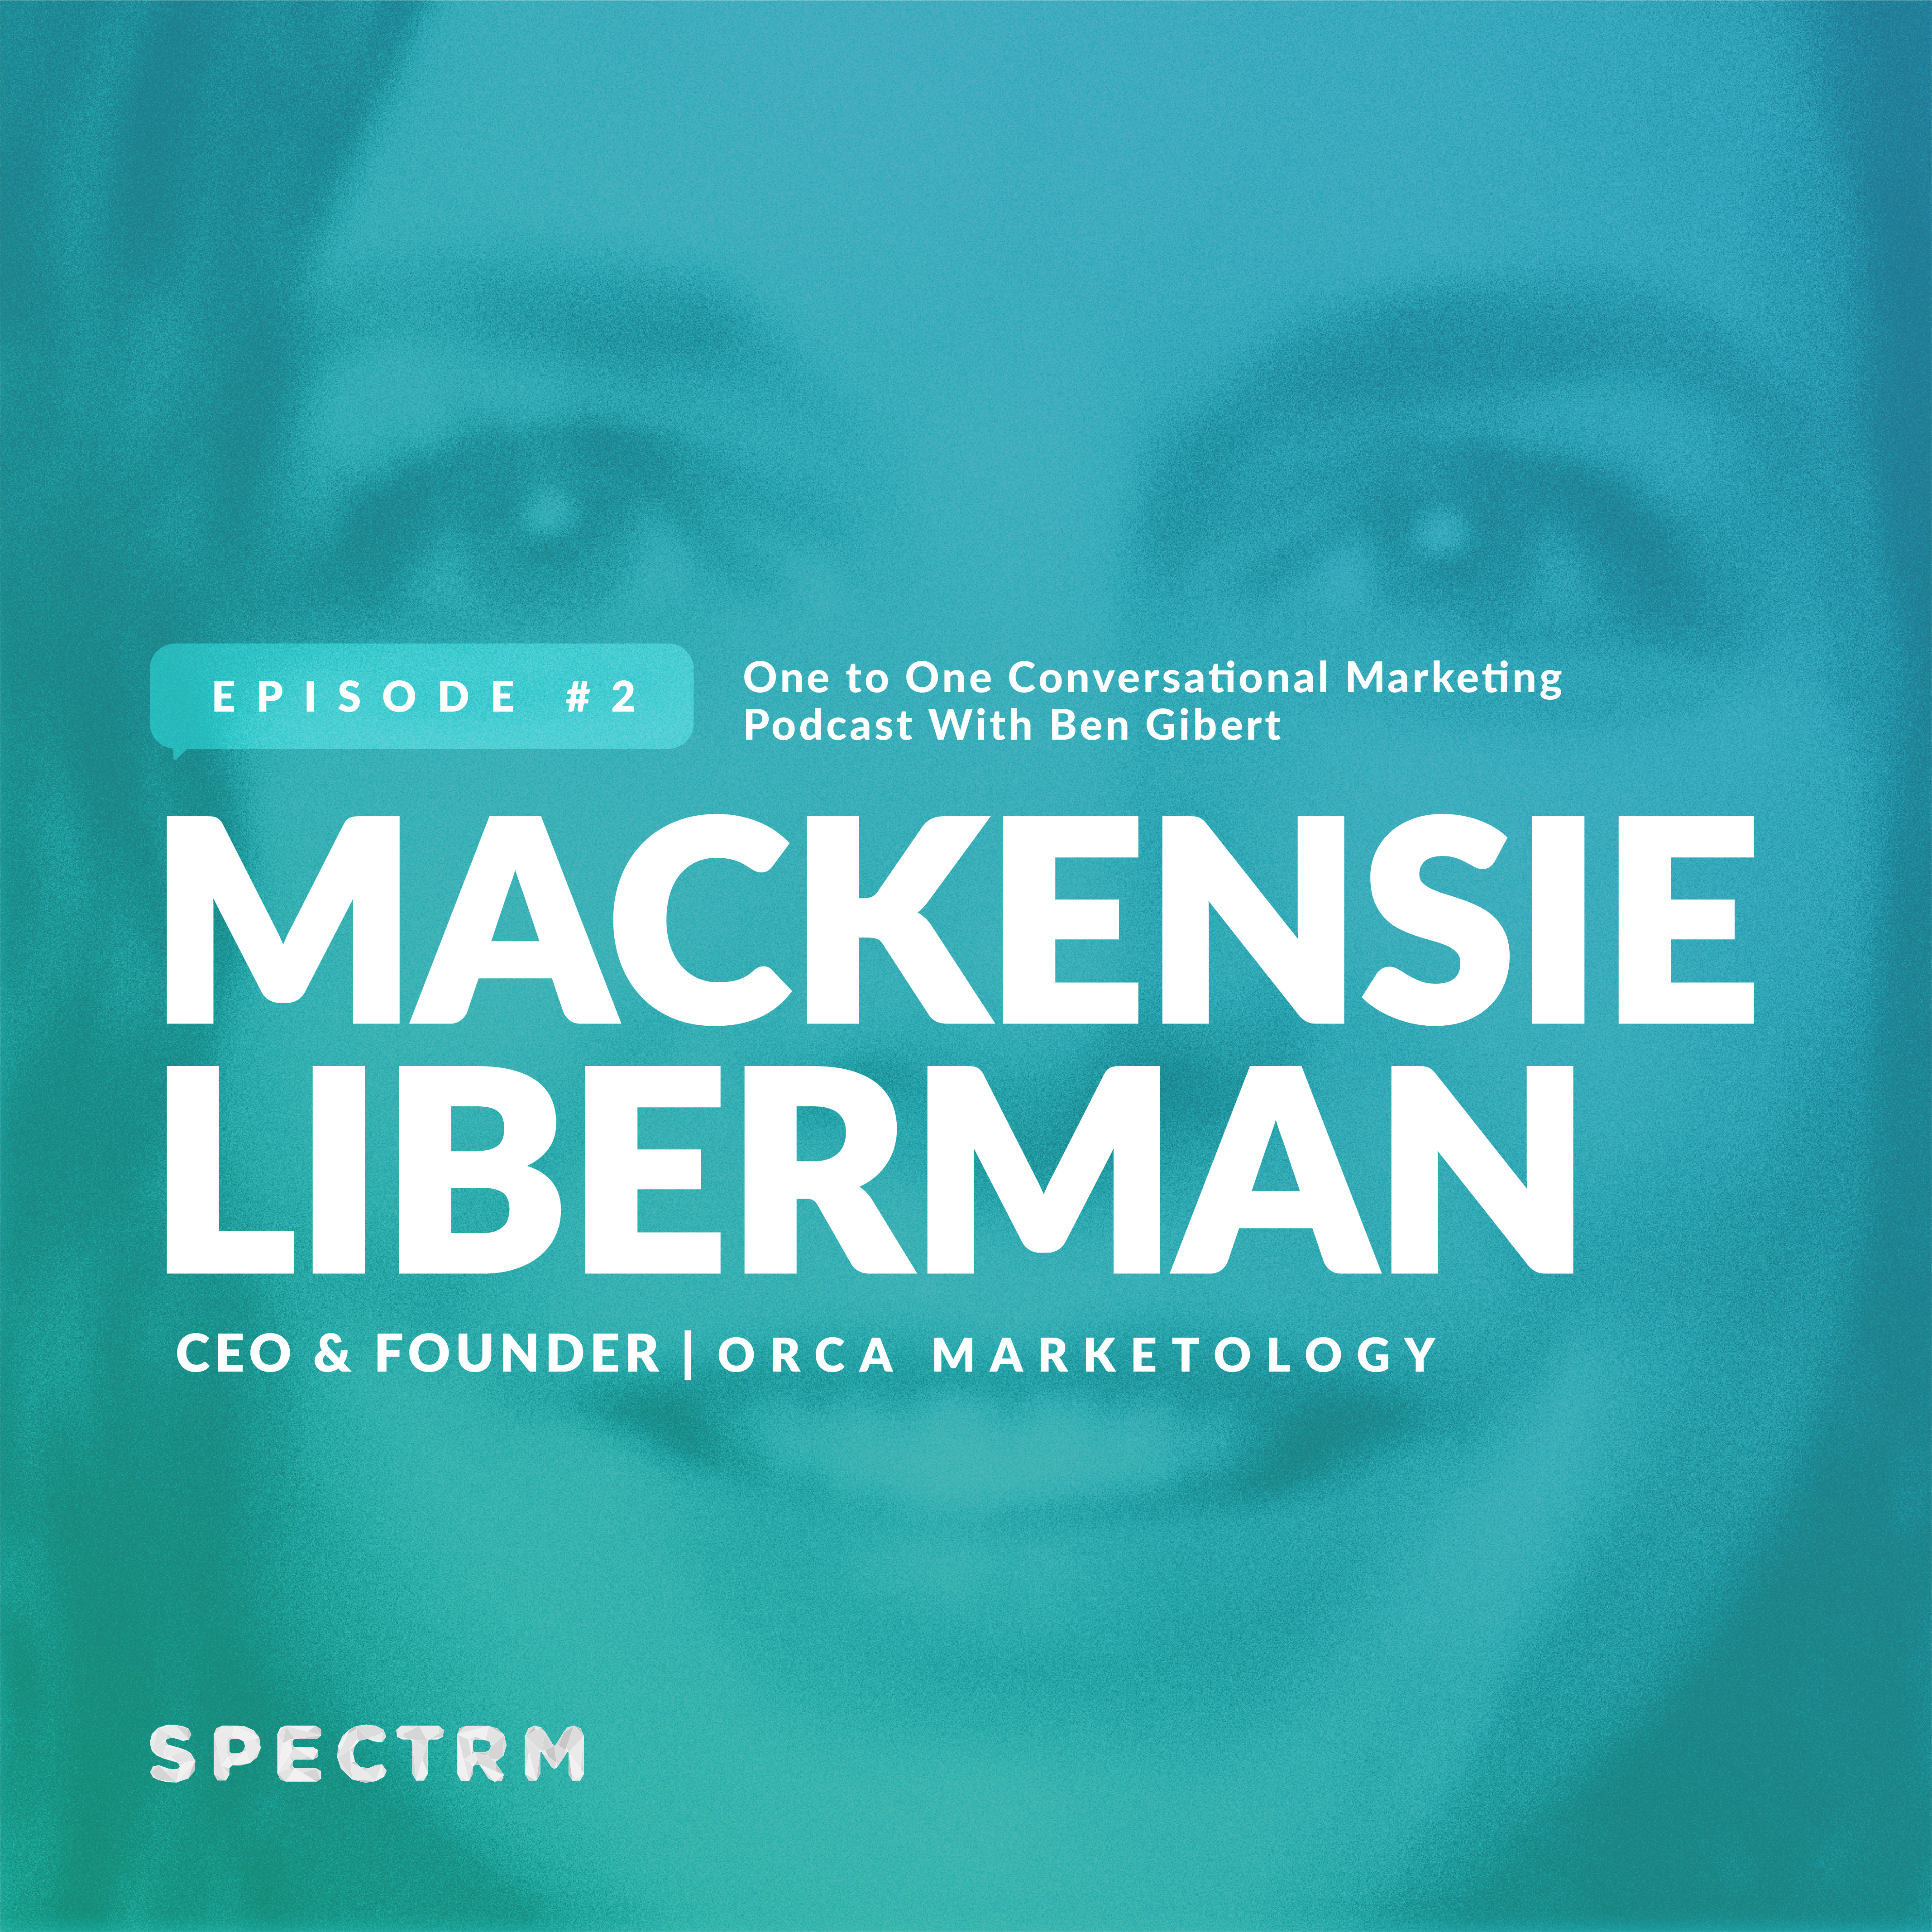 spectrm podcast episode with mackensie liberman